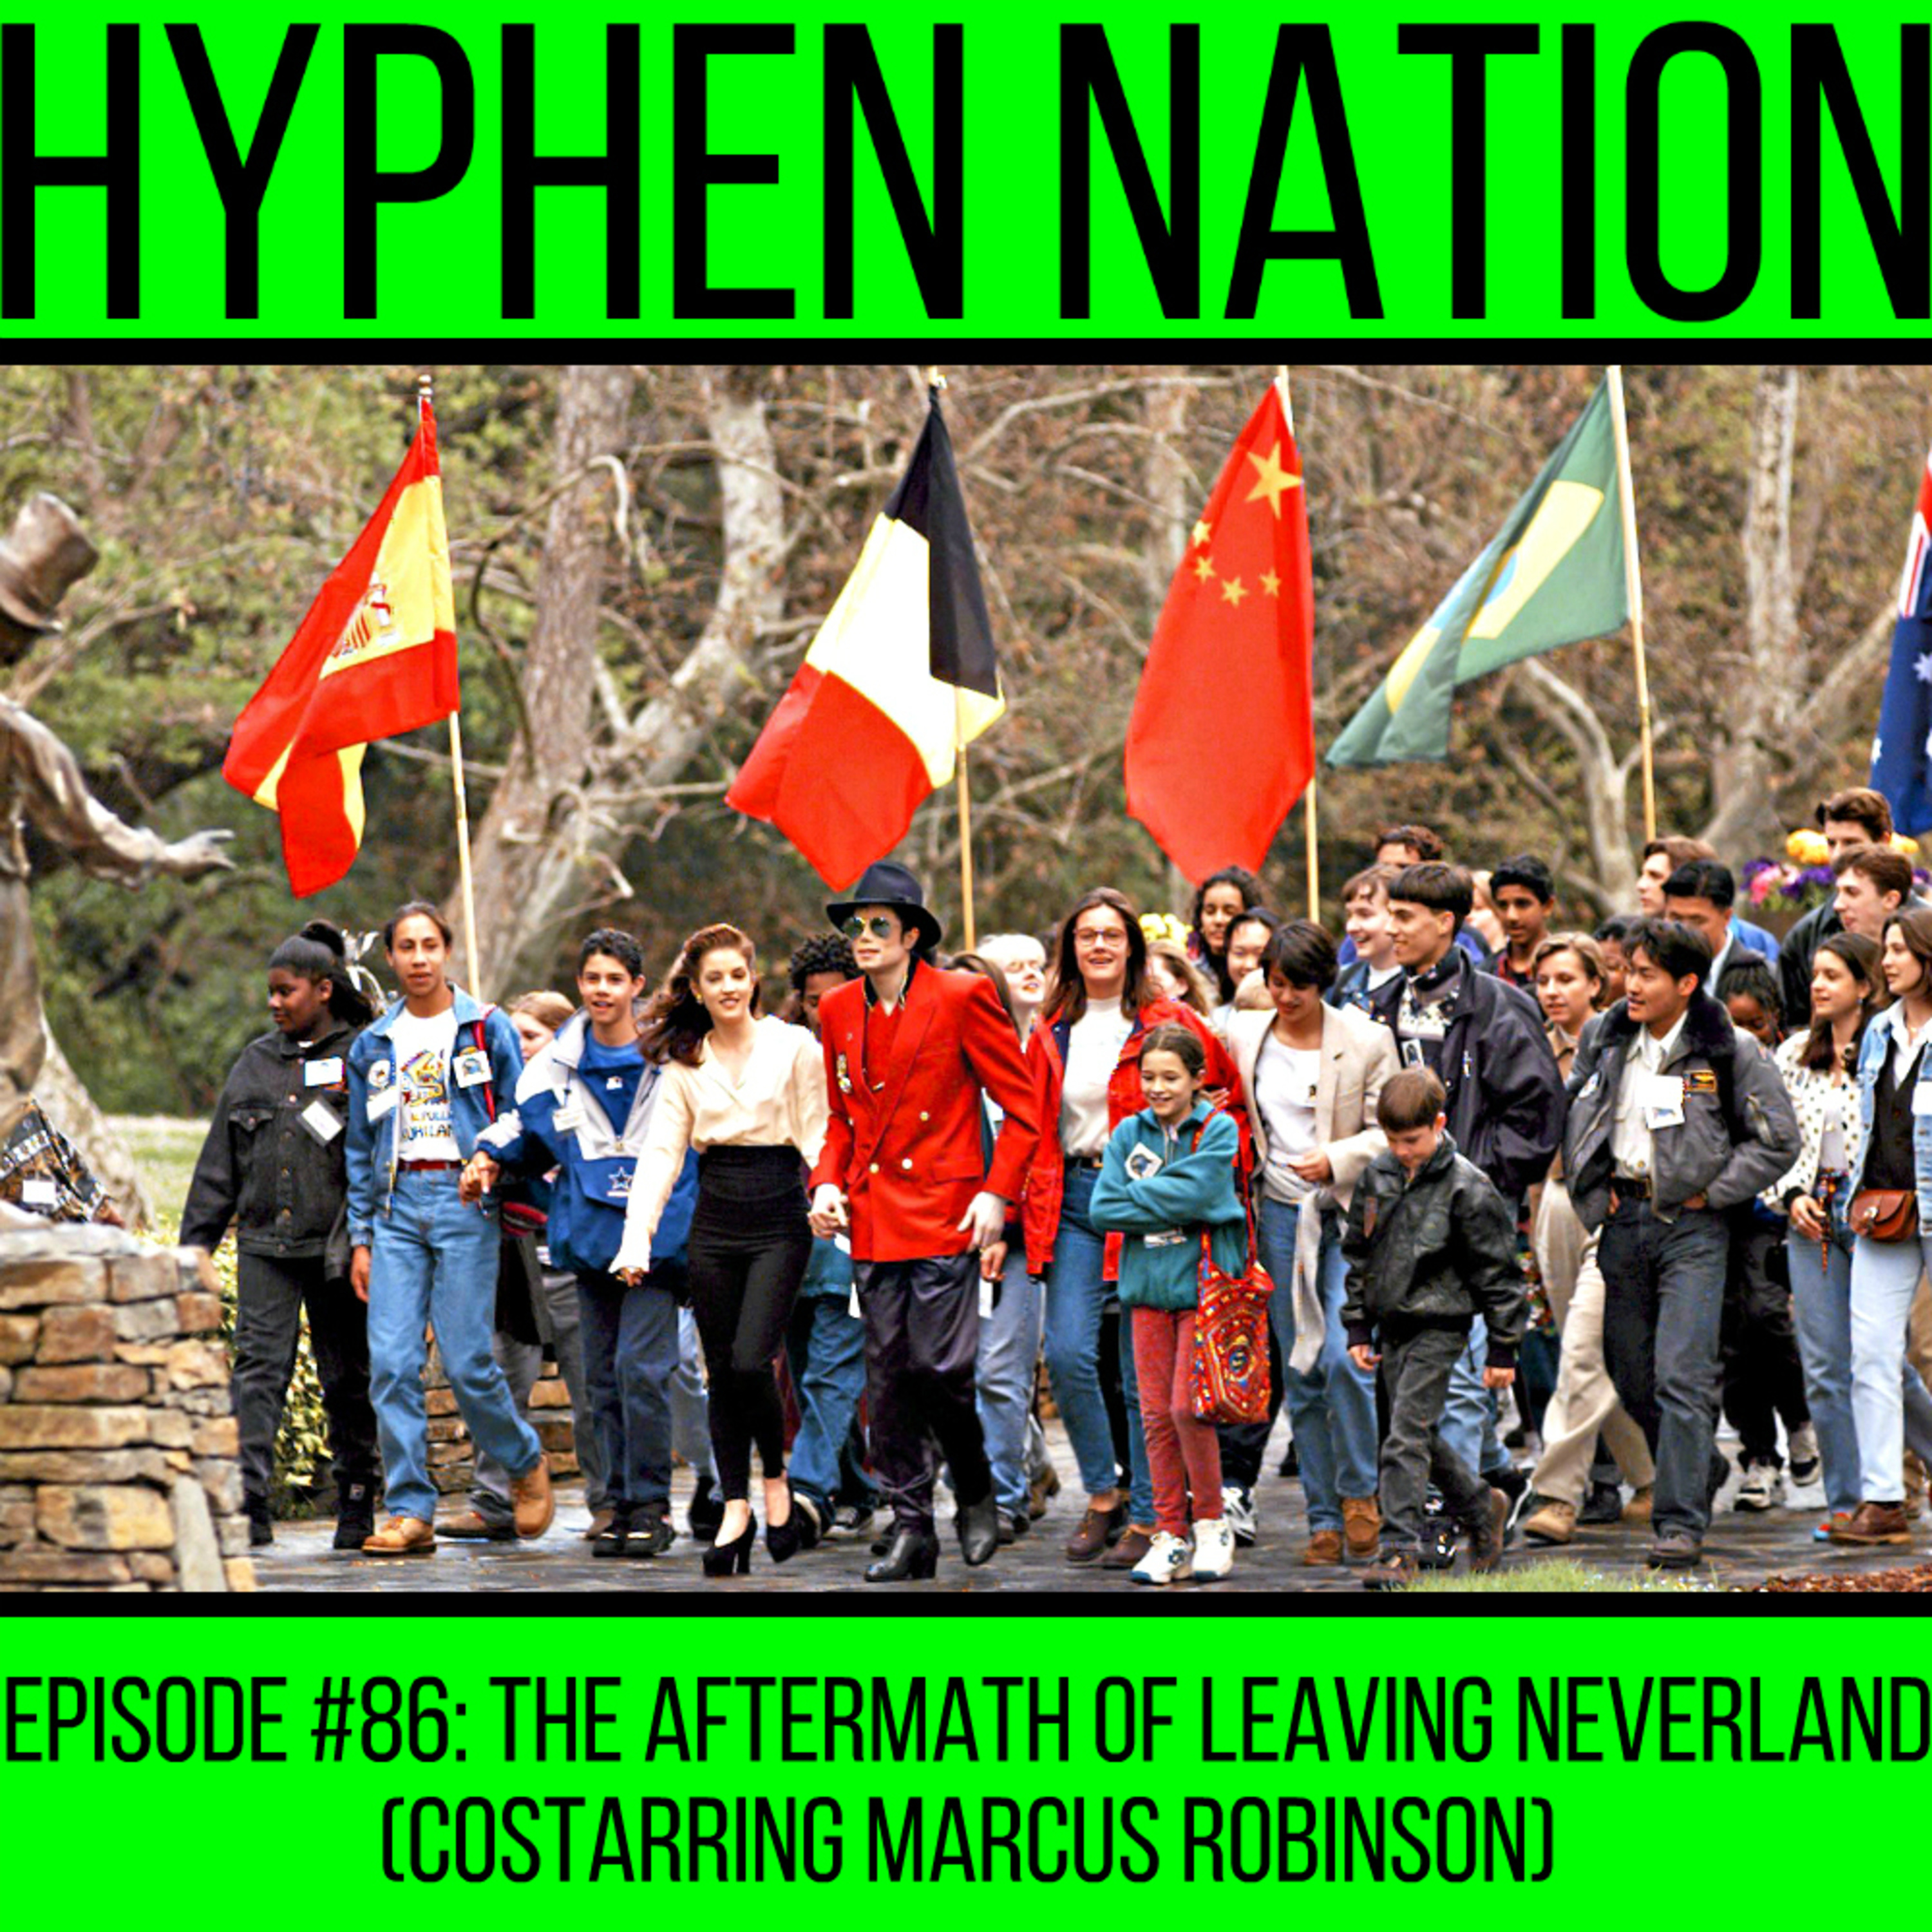 Episode #86: The Aftermath Of Leaving Neverland (Costarring Marcus Robinson)